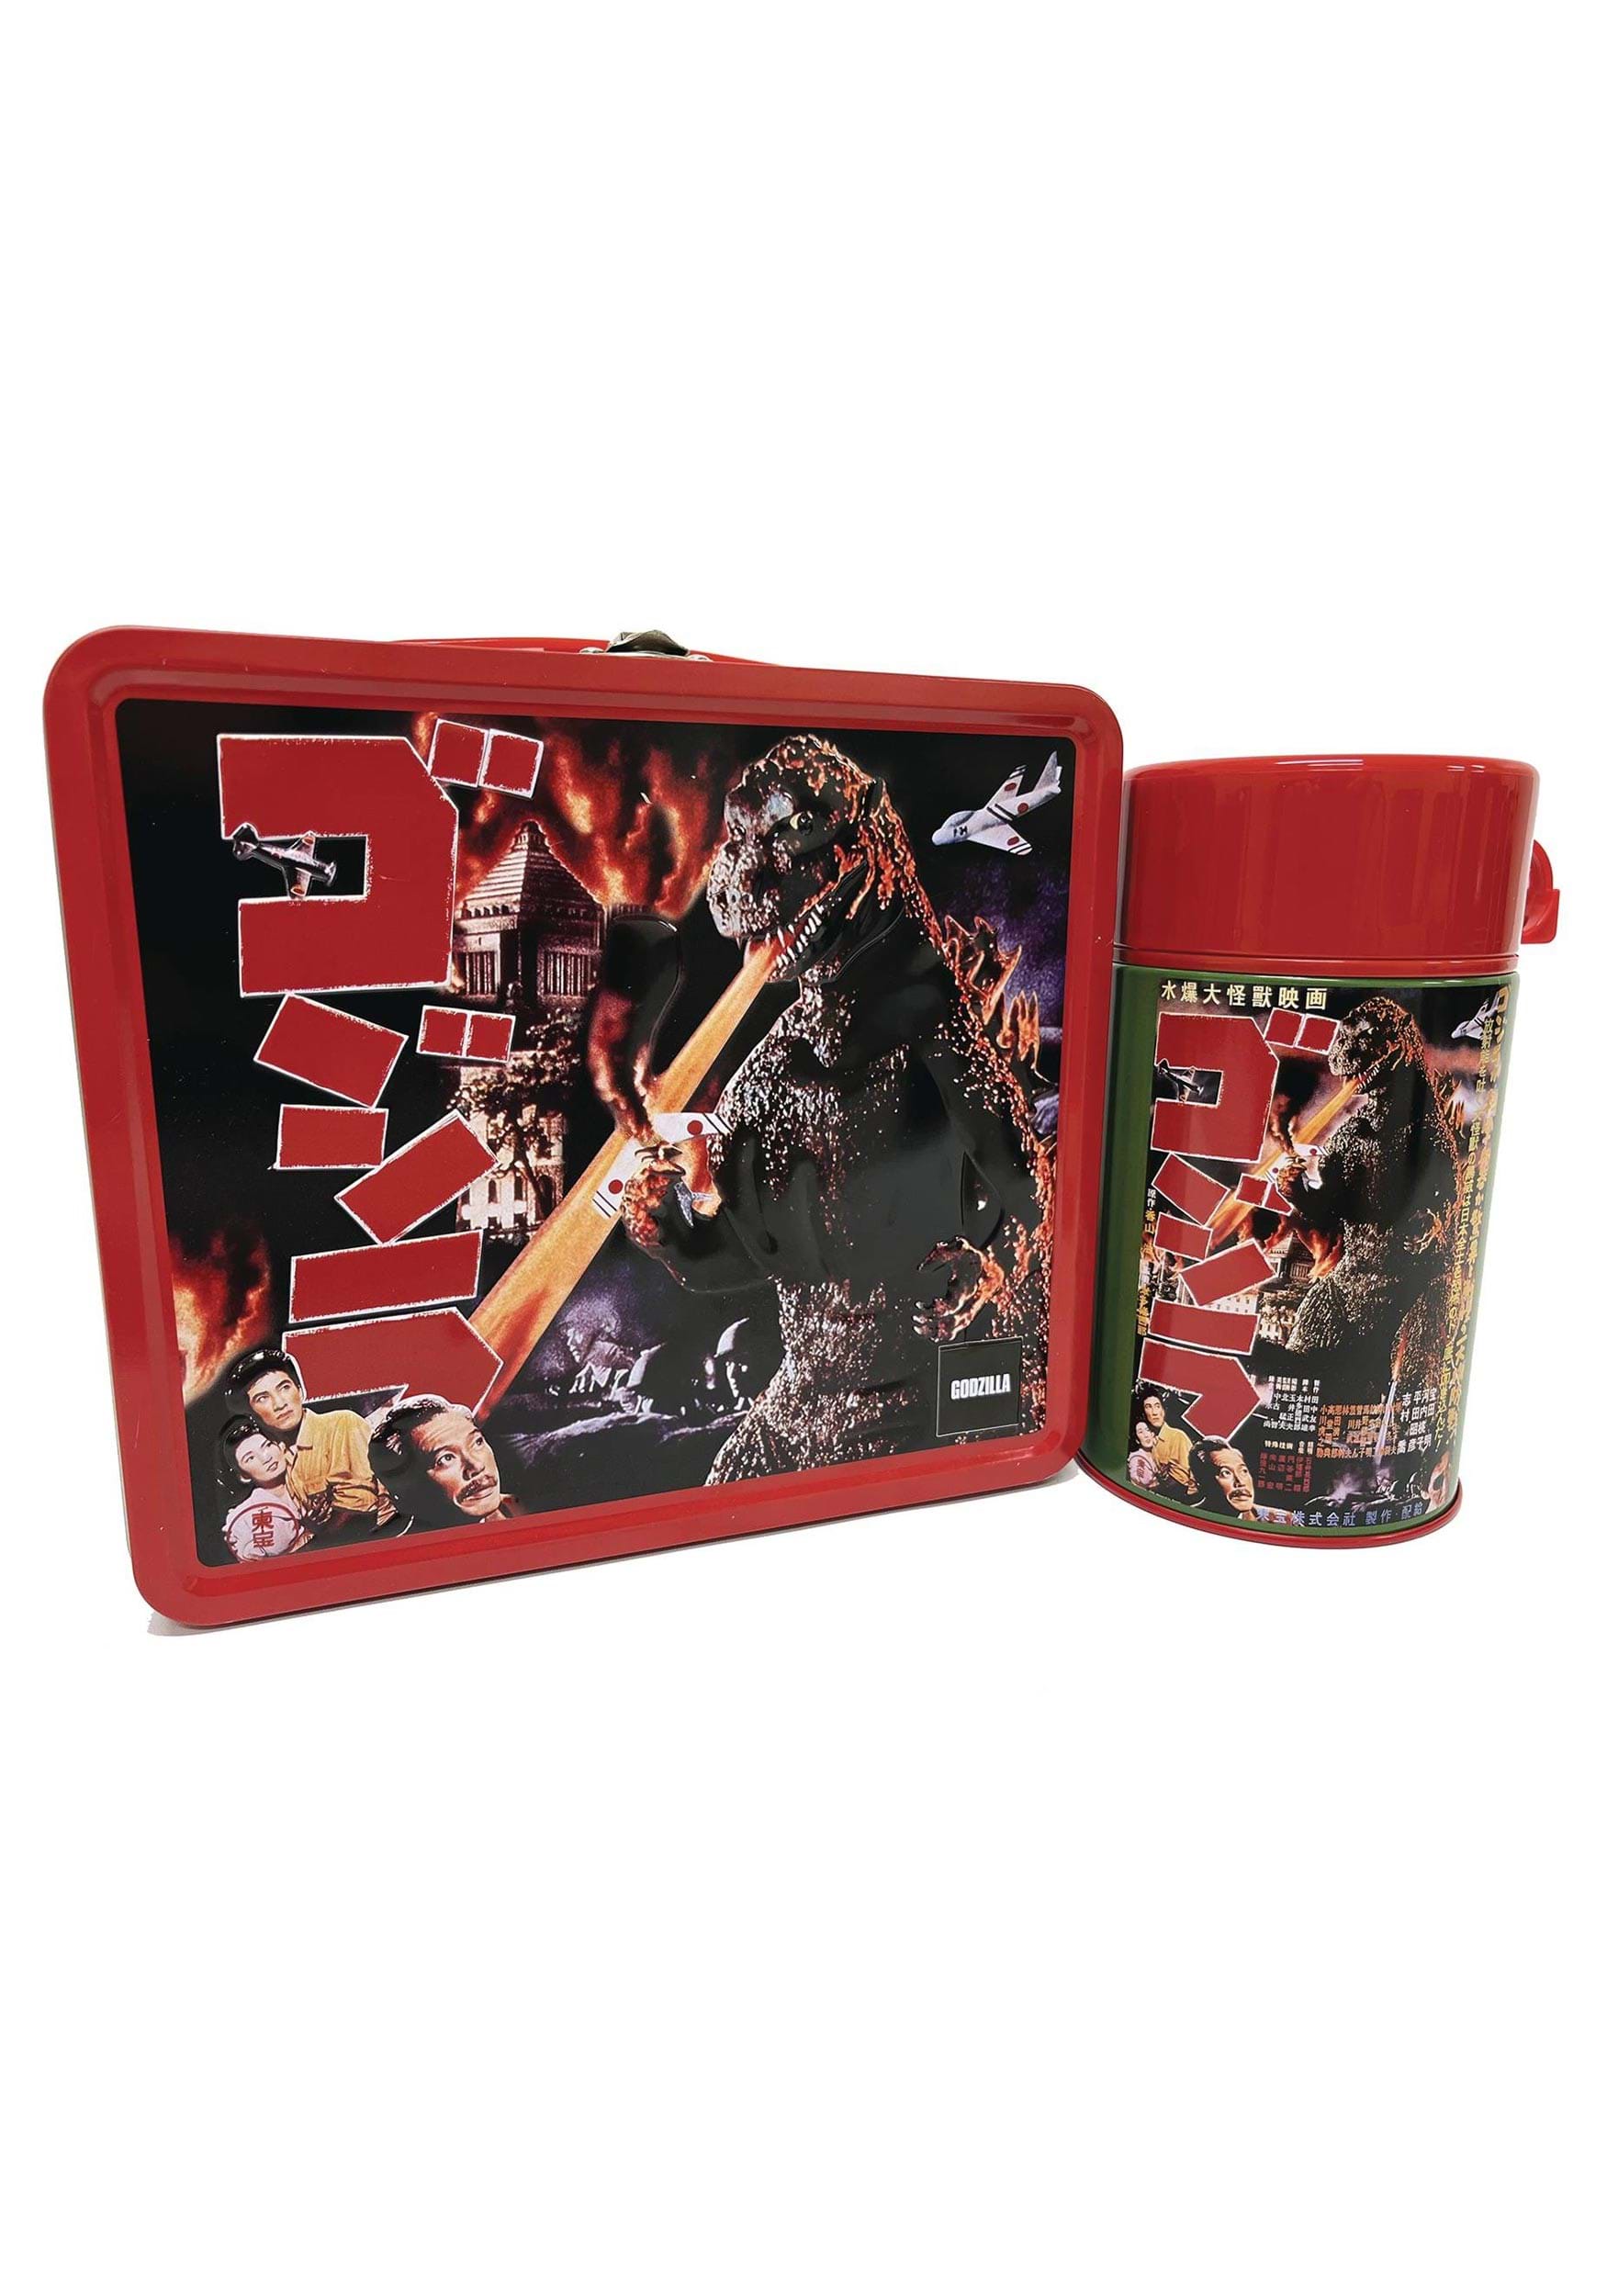 Tin Titans Godzilla 1954 Lunchbox and Drink Container